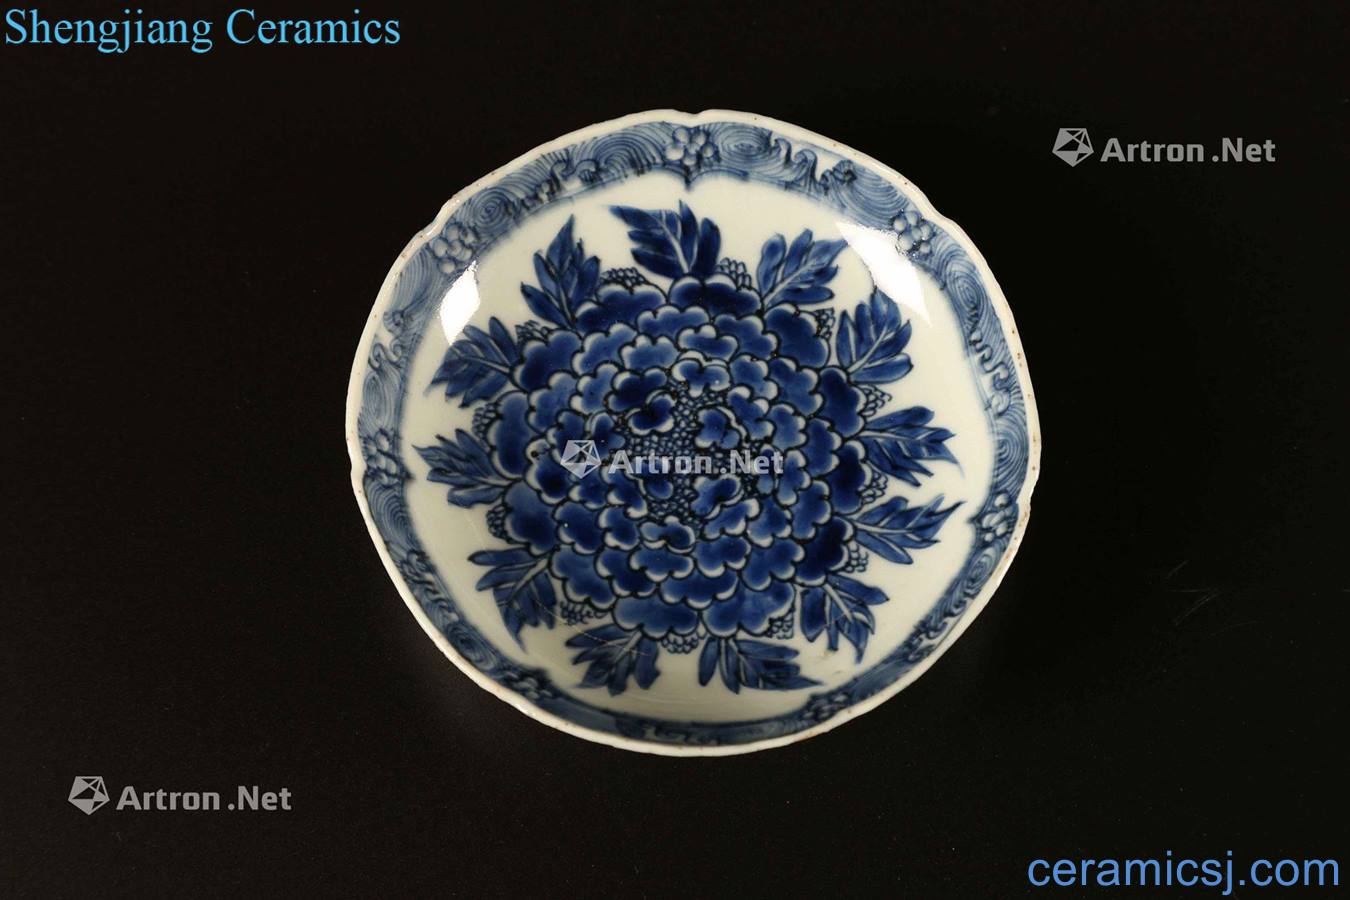 THE Qing dynasty A BLUE AND WHITE PORCELAIN DISH WITH LOBED RIM AND SPURIOUS CHENGHUA MARK AT THE BASECHINA